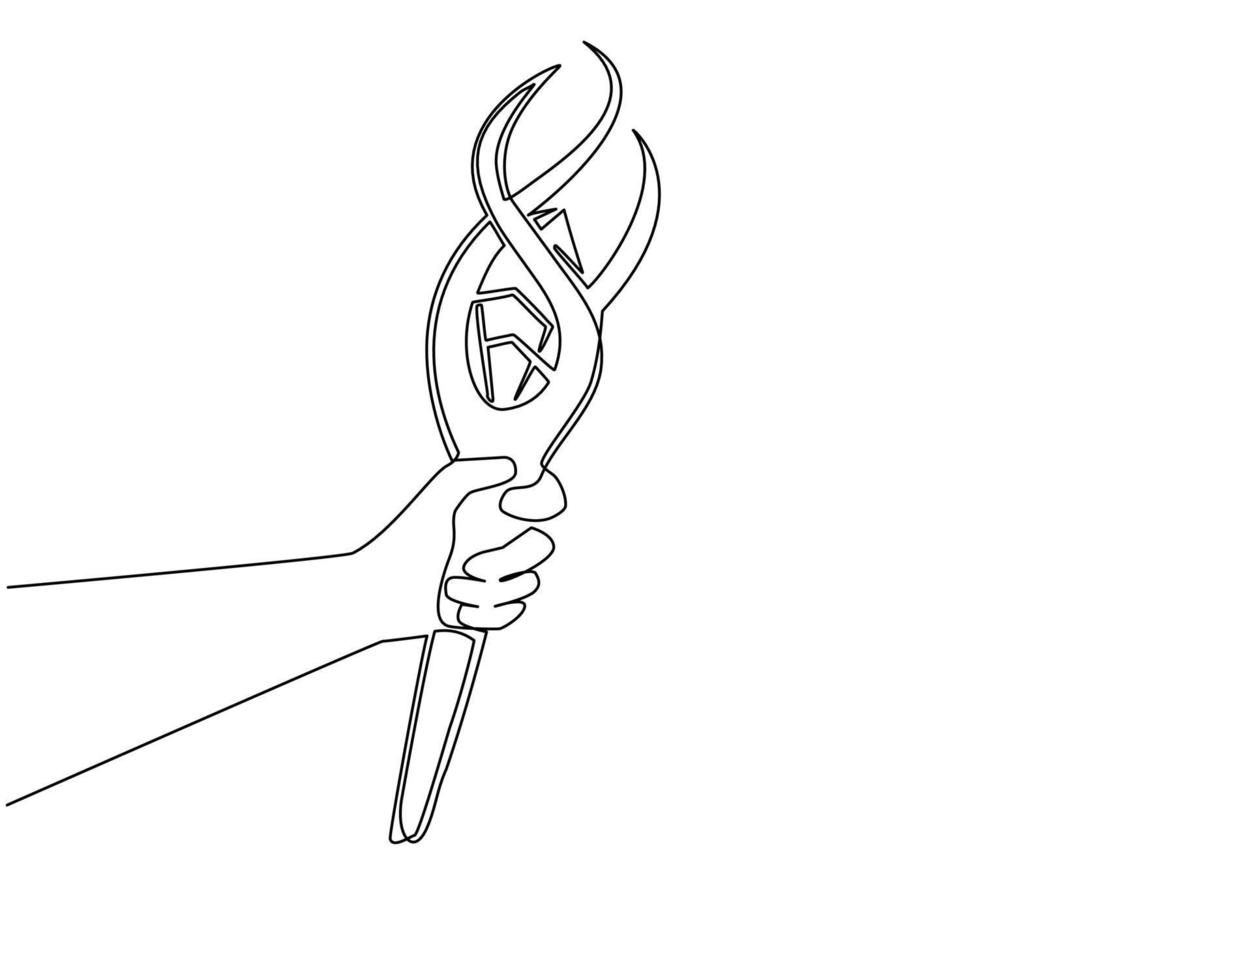 Single continuous line drawing hand holding magic staff of wizard, mage, warlock, shaman. Cartoon line art illustration of legendary weapon for fantasy characters. One line draw graphic design vector